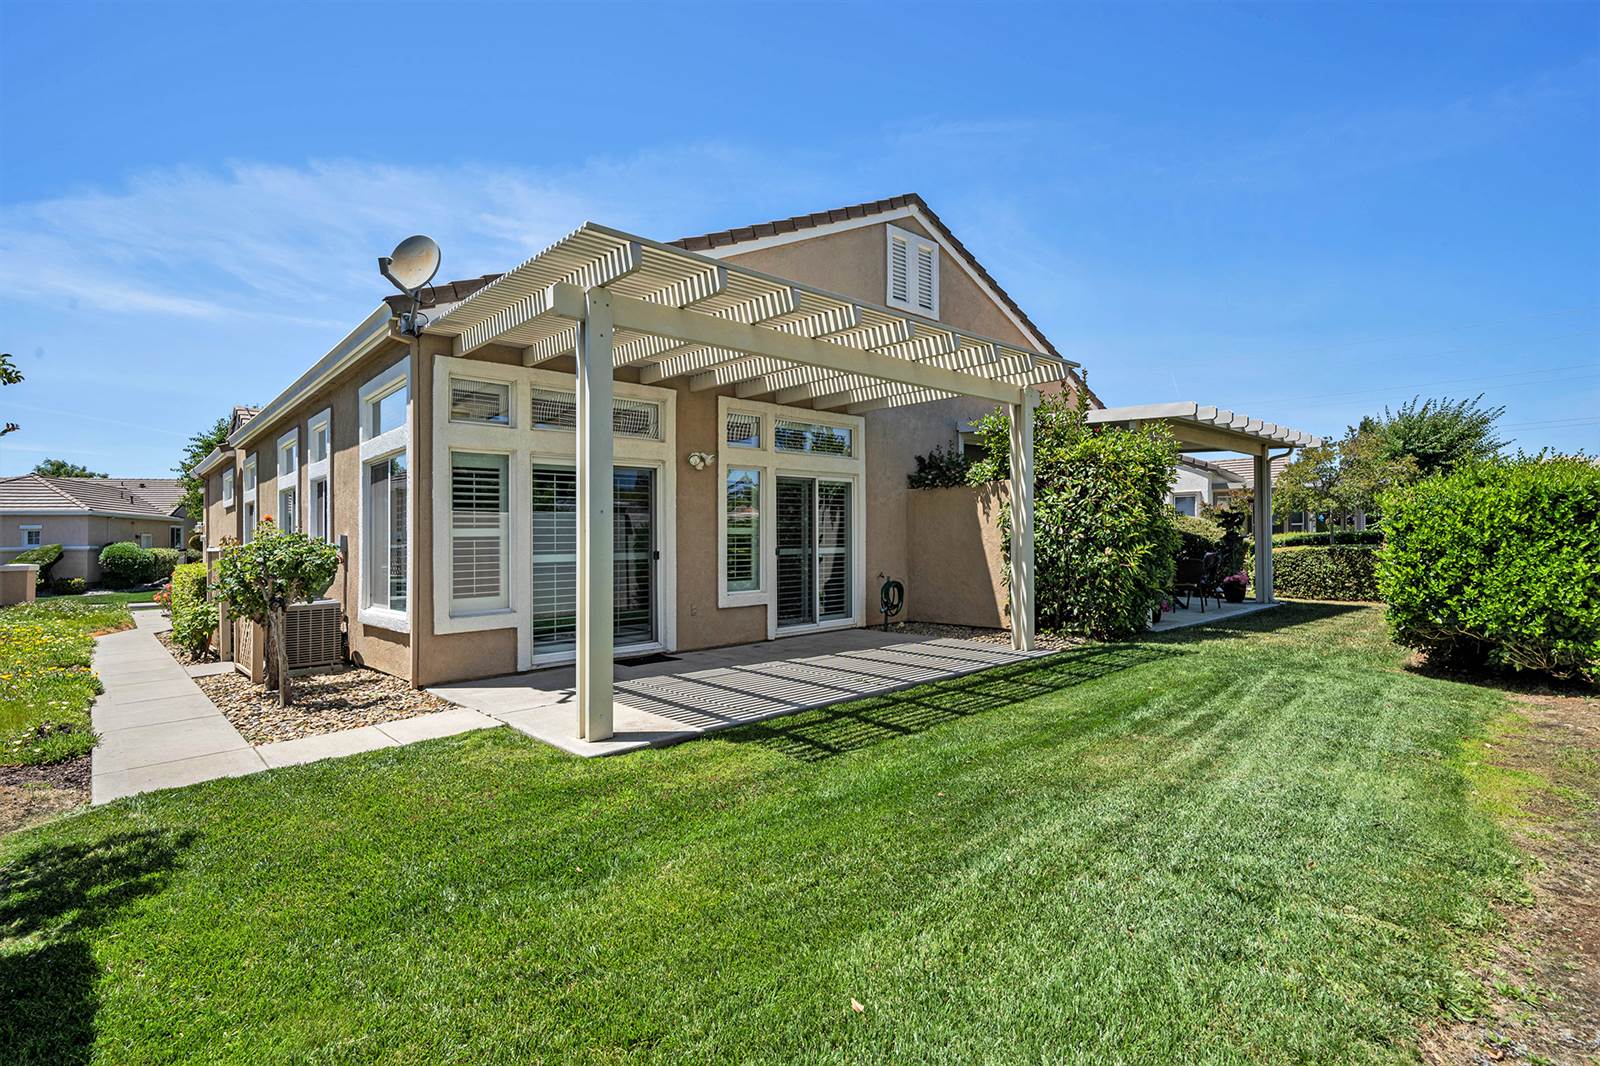 326 Gladstone Dr, Brentwood, CA 94513